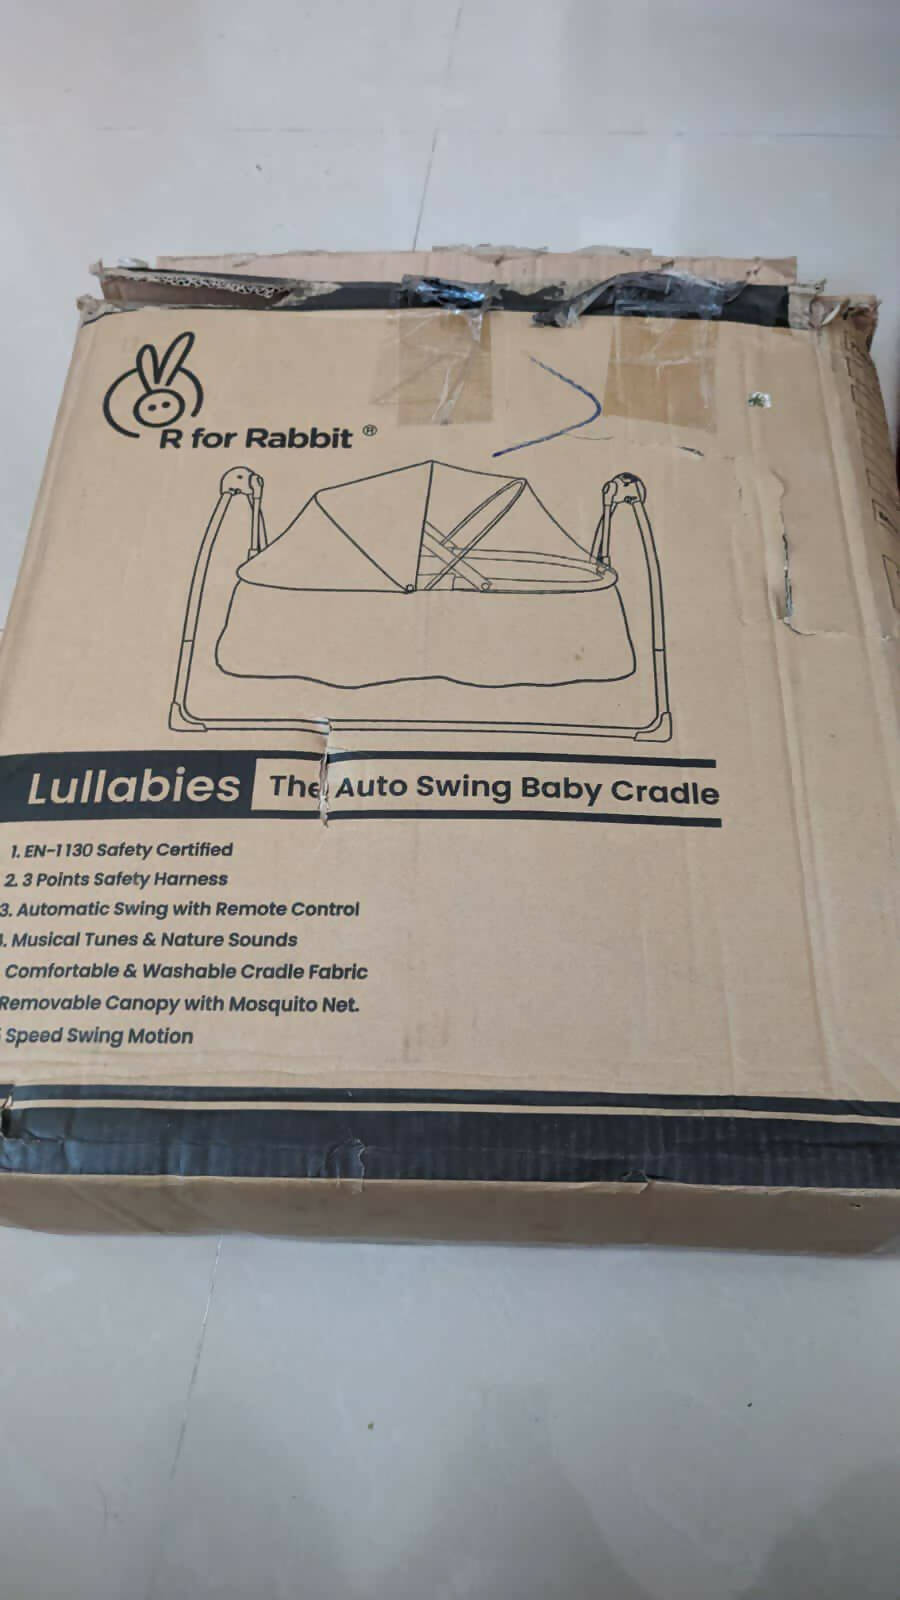 R FOR RABBIT Lullabies Automatic Swing Baby Cradle with Remote Control & Mosquito Net